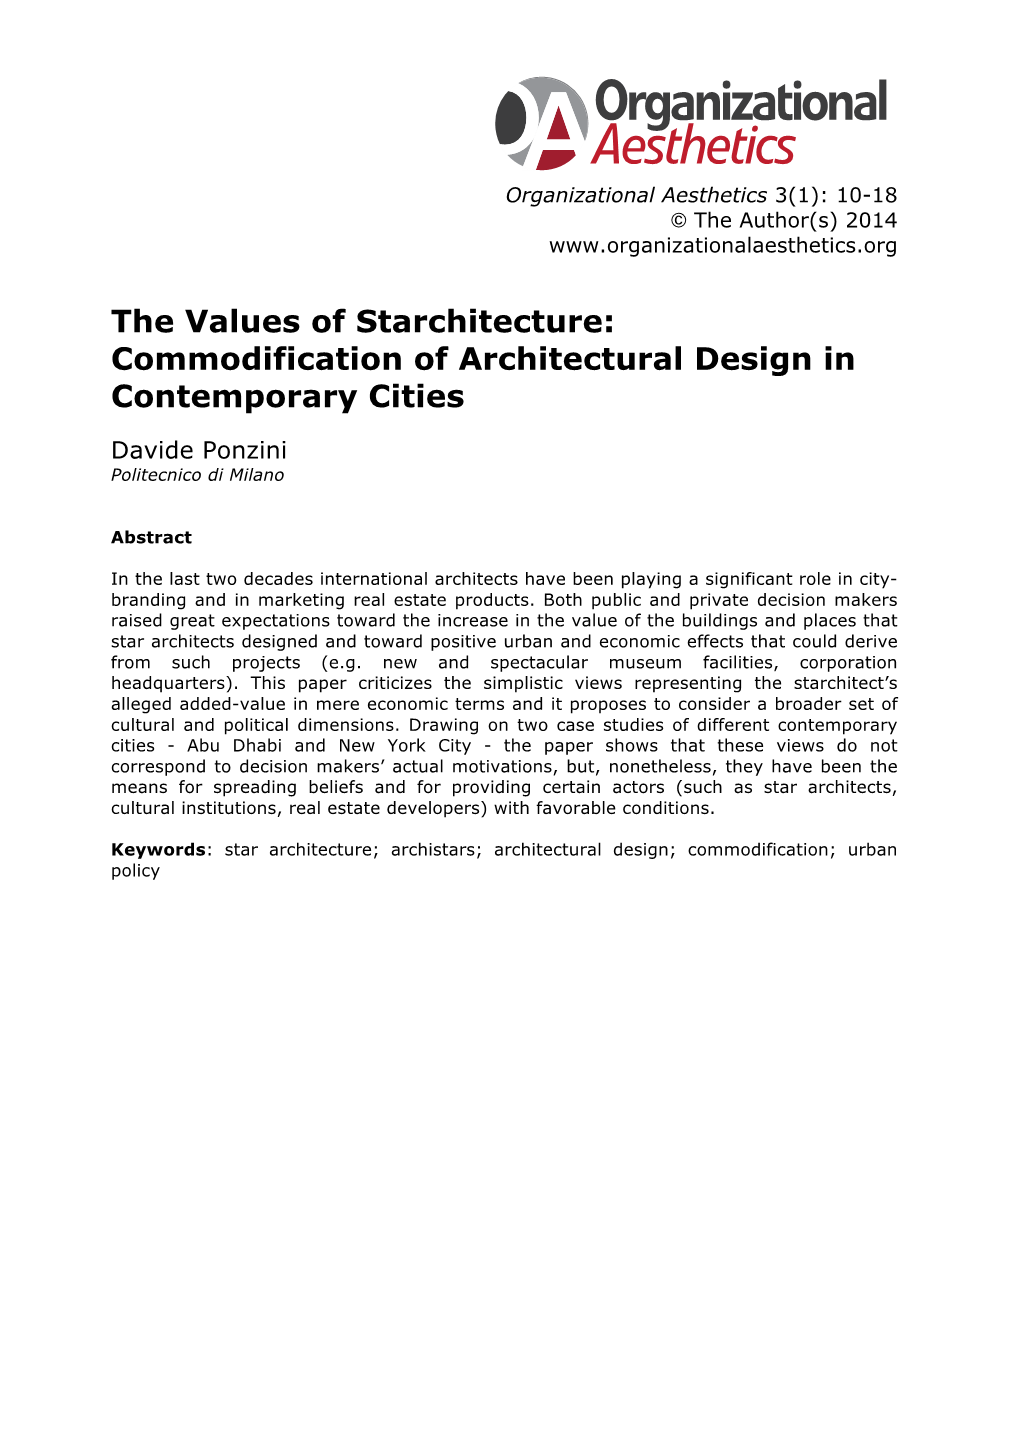 Commodification of Architectural Design in Contemporary Cities